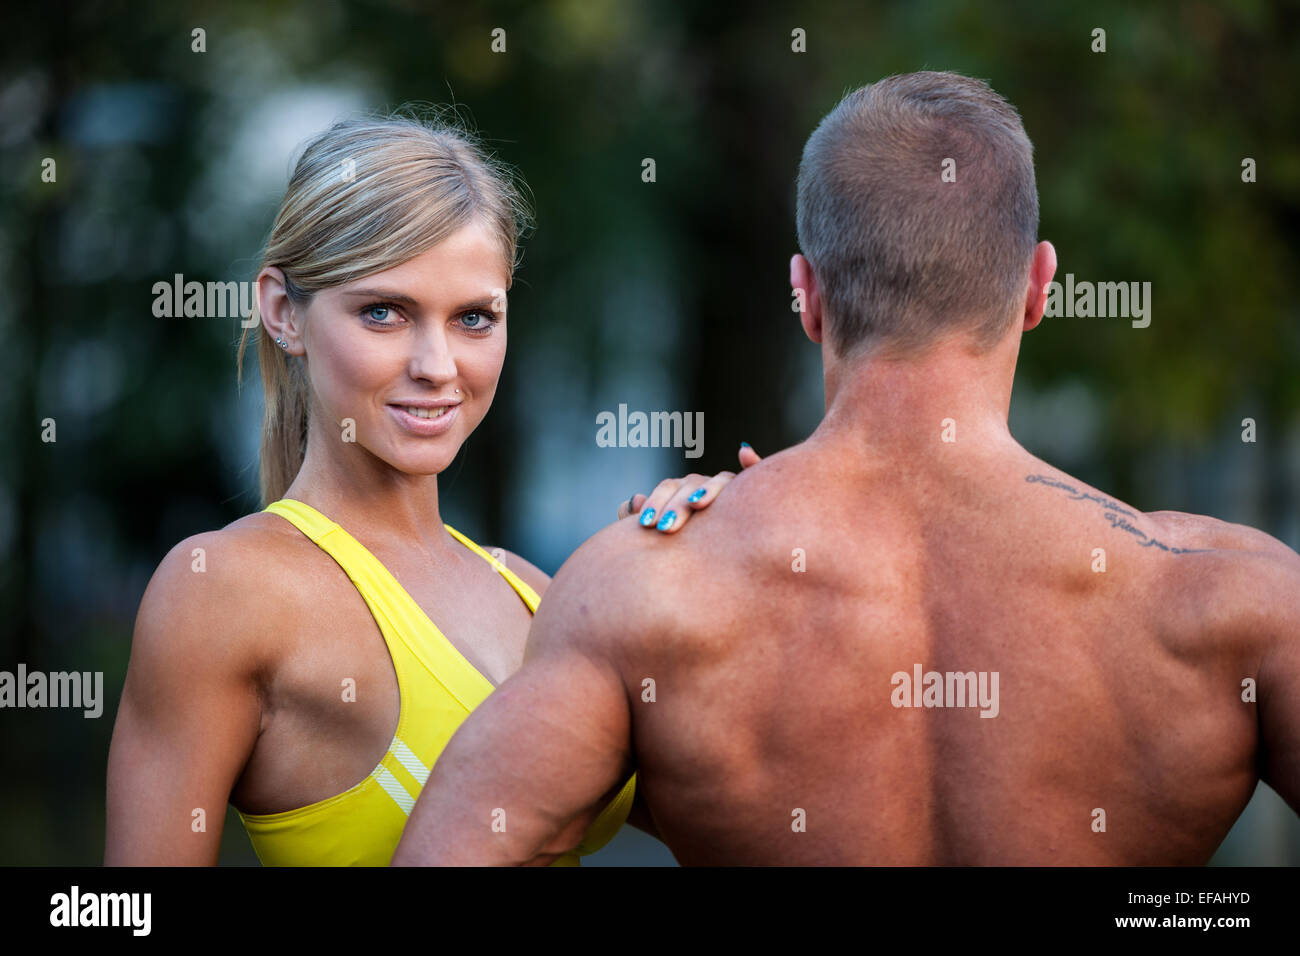 Fitness couple on a street workout outdoors Stock Photo